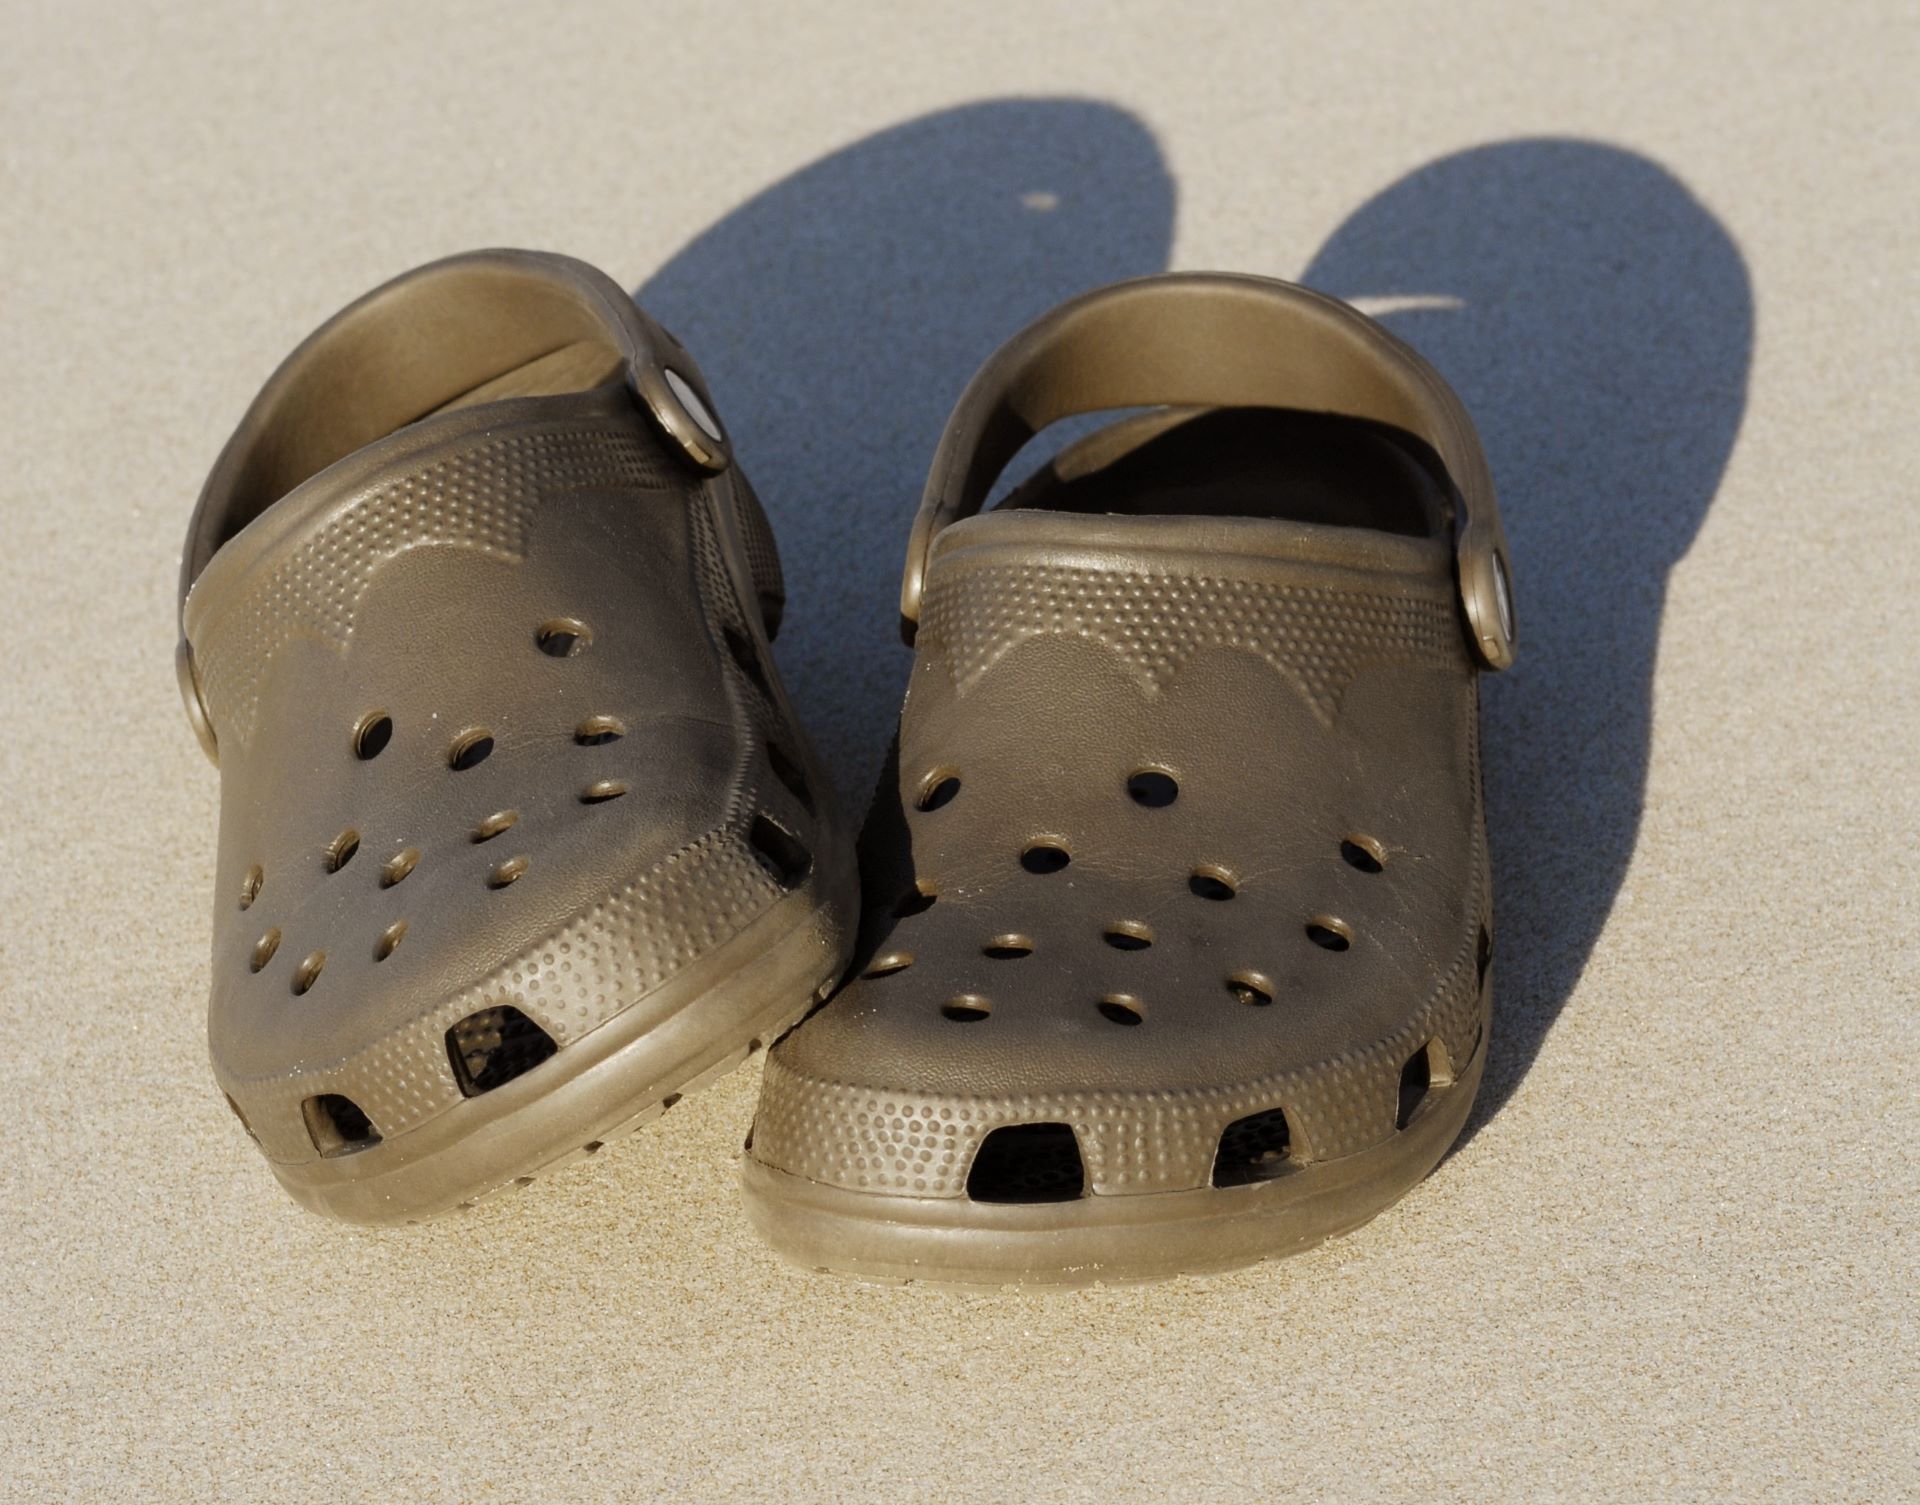 Crocs rewarding consumers for handing in their old shoes: 'We can ...